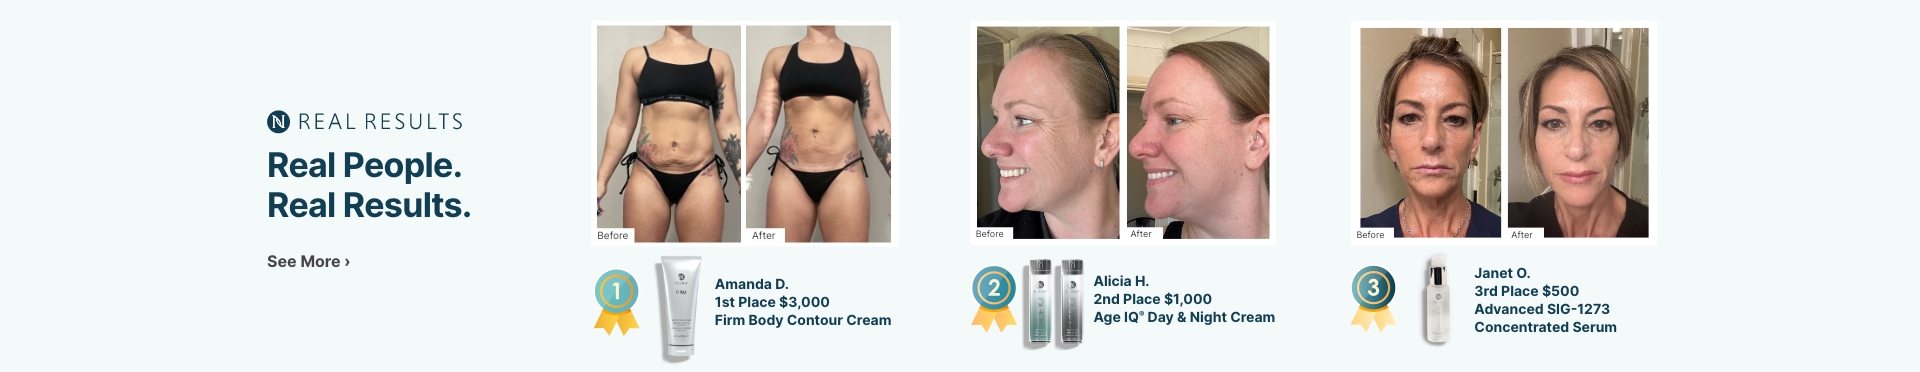 Real People. Real Results. Click here to see more. Before and after pictures of people using Neora products.